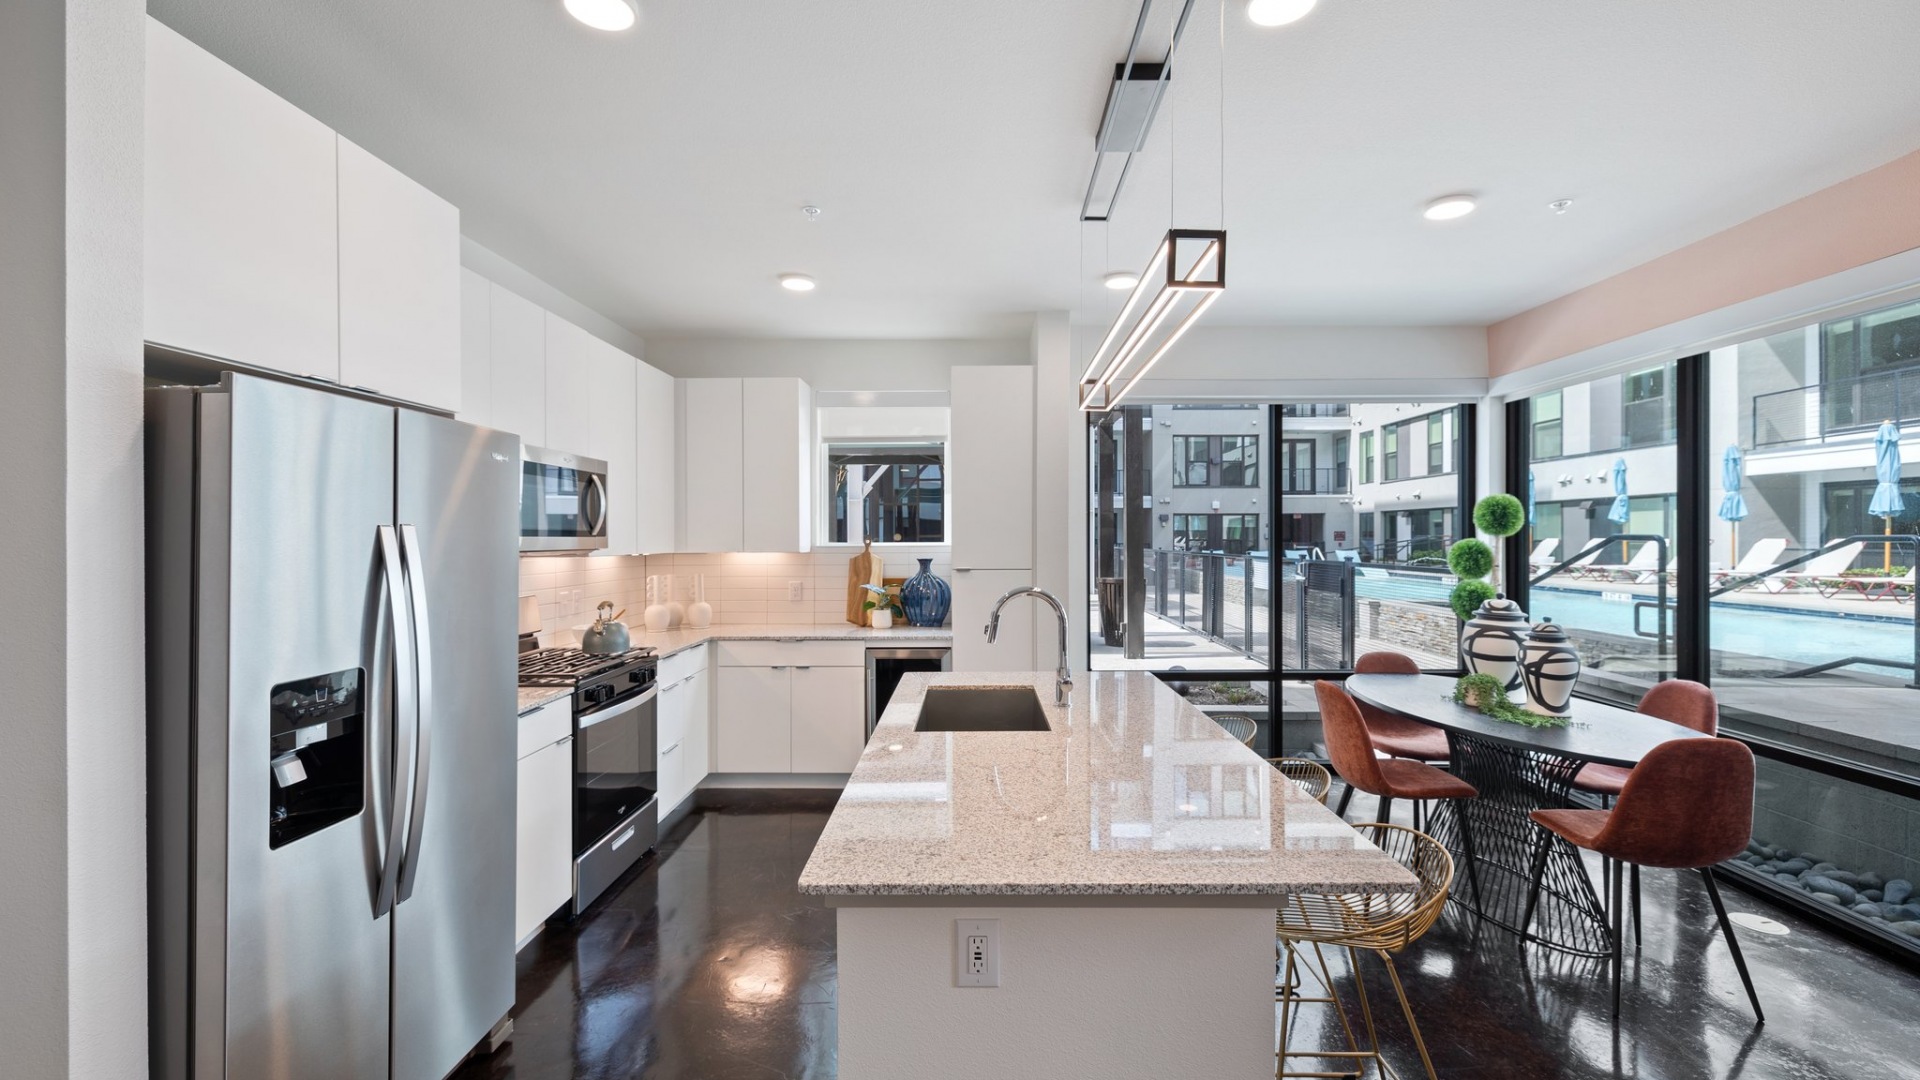 Interior Home Kitchen with Stainless Steel Appliances and Dining Room